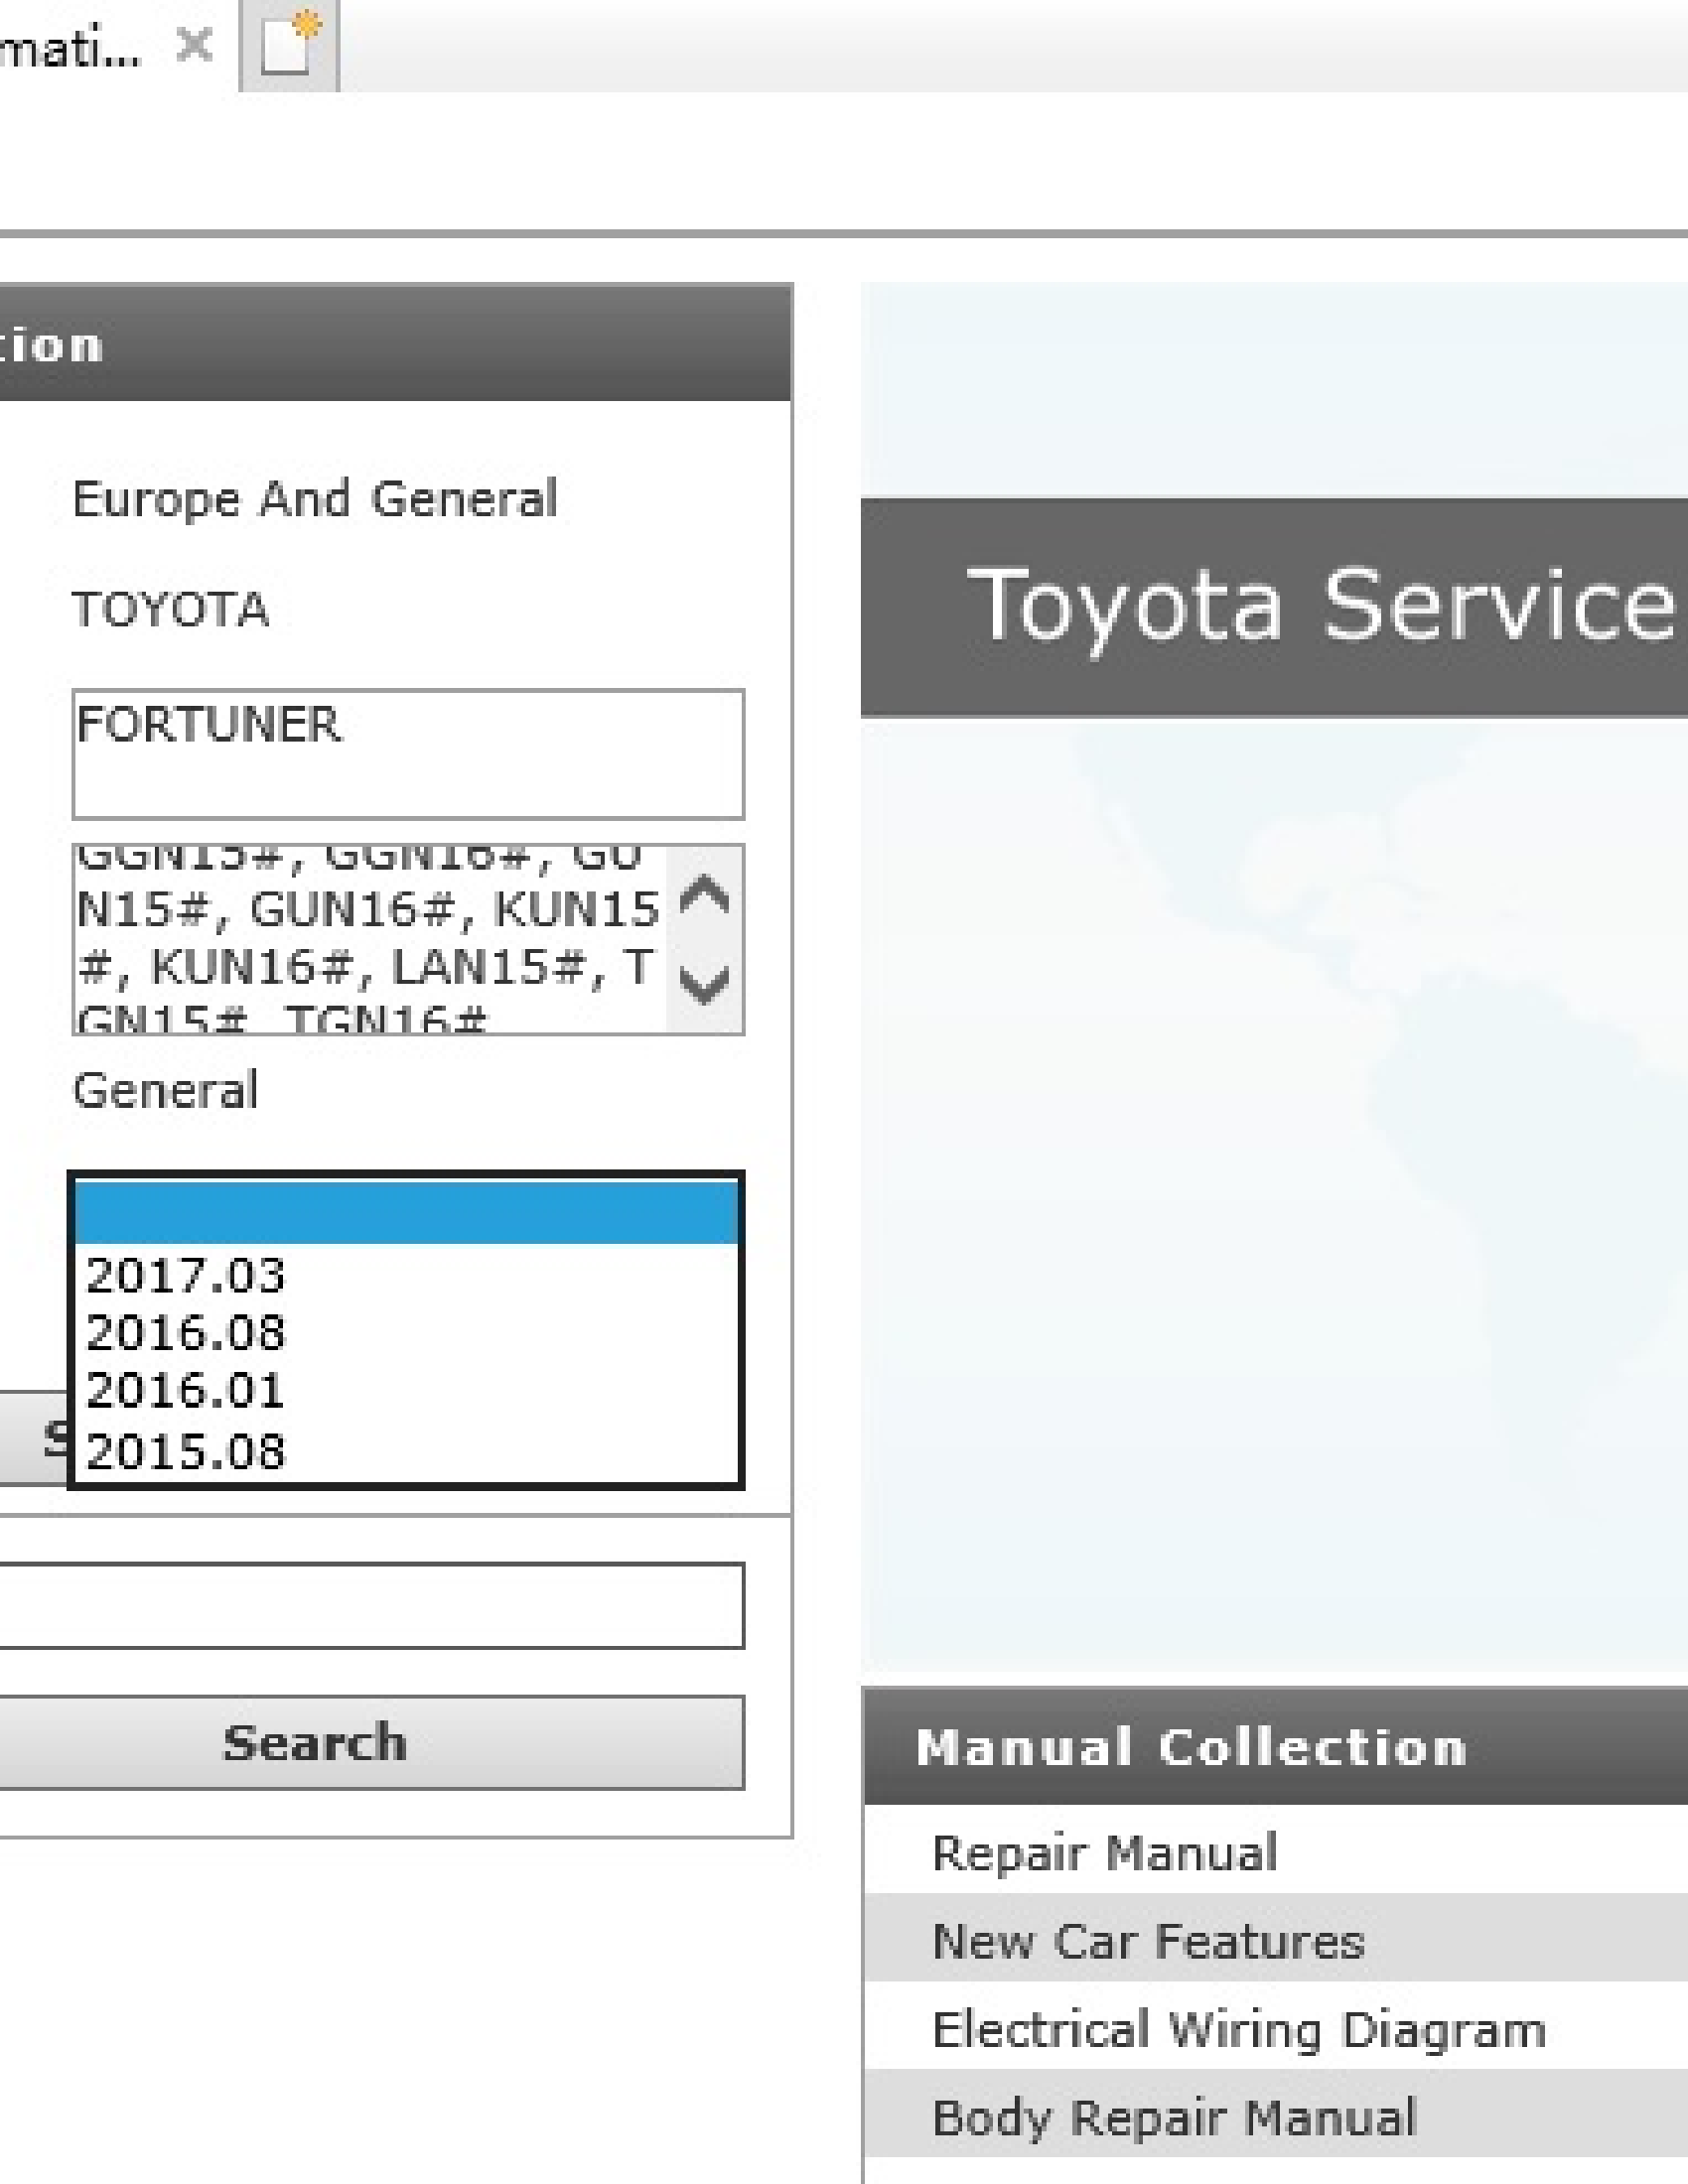 Toyota (GGN15# FORTUNER manual